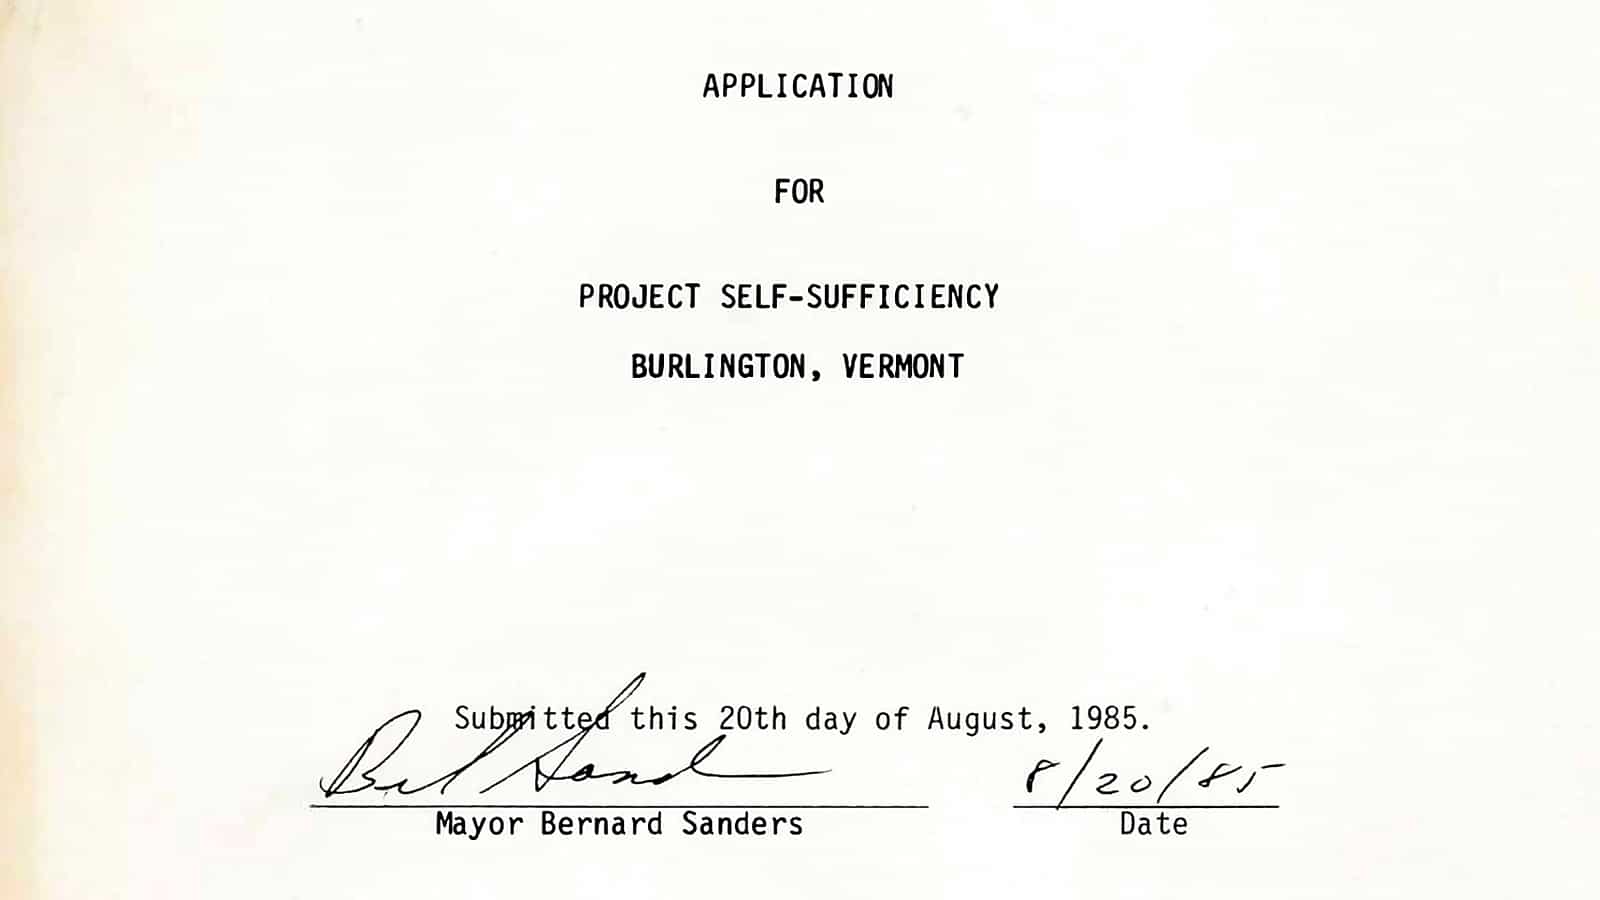 Mayor Bernie Sanders And CEDO Introduce “Project Self-Sufficiency” (PSS) For Single Parents